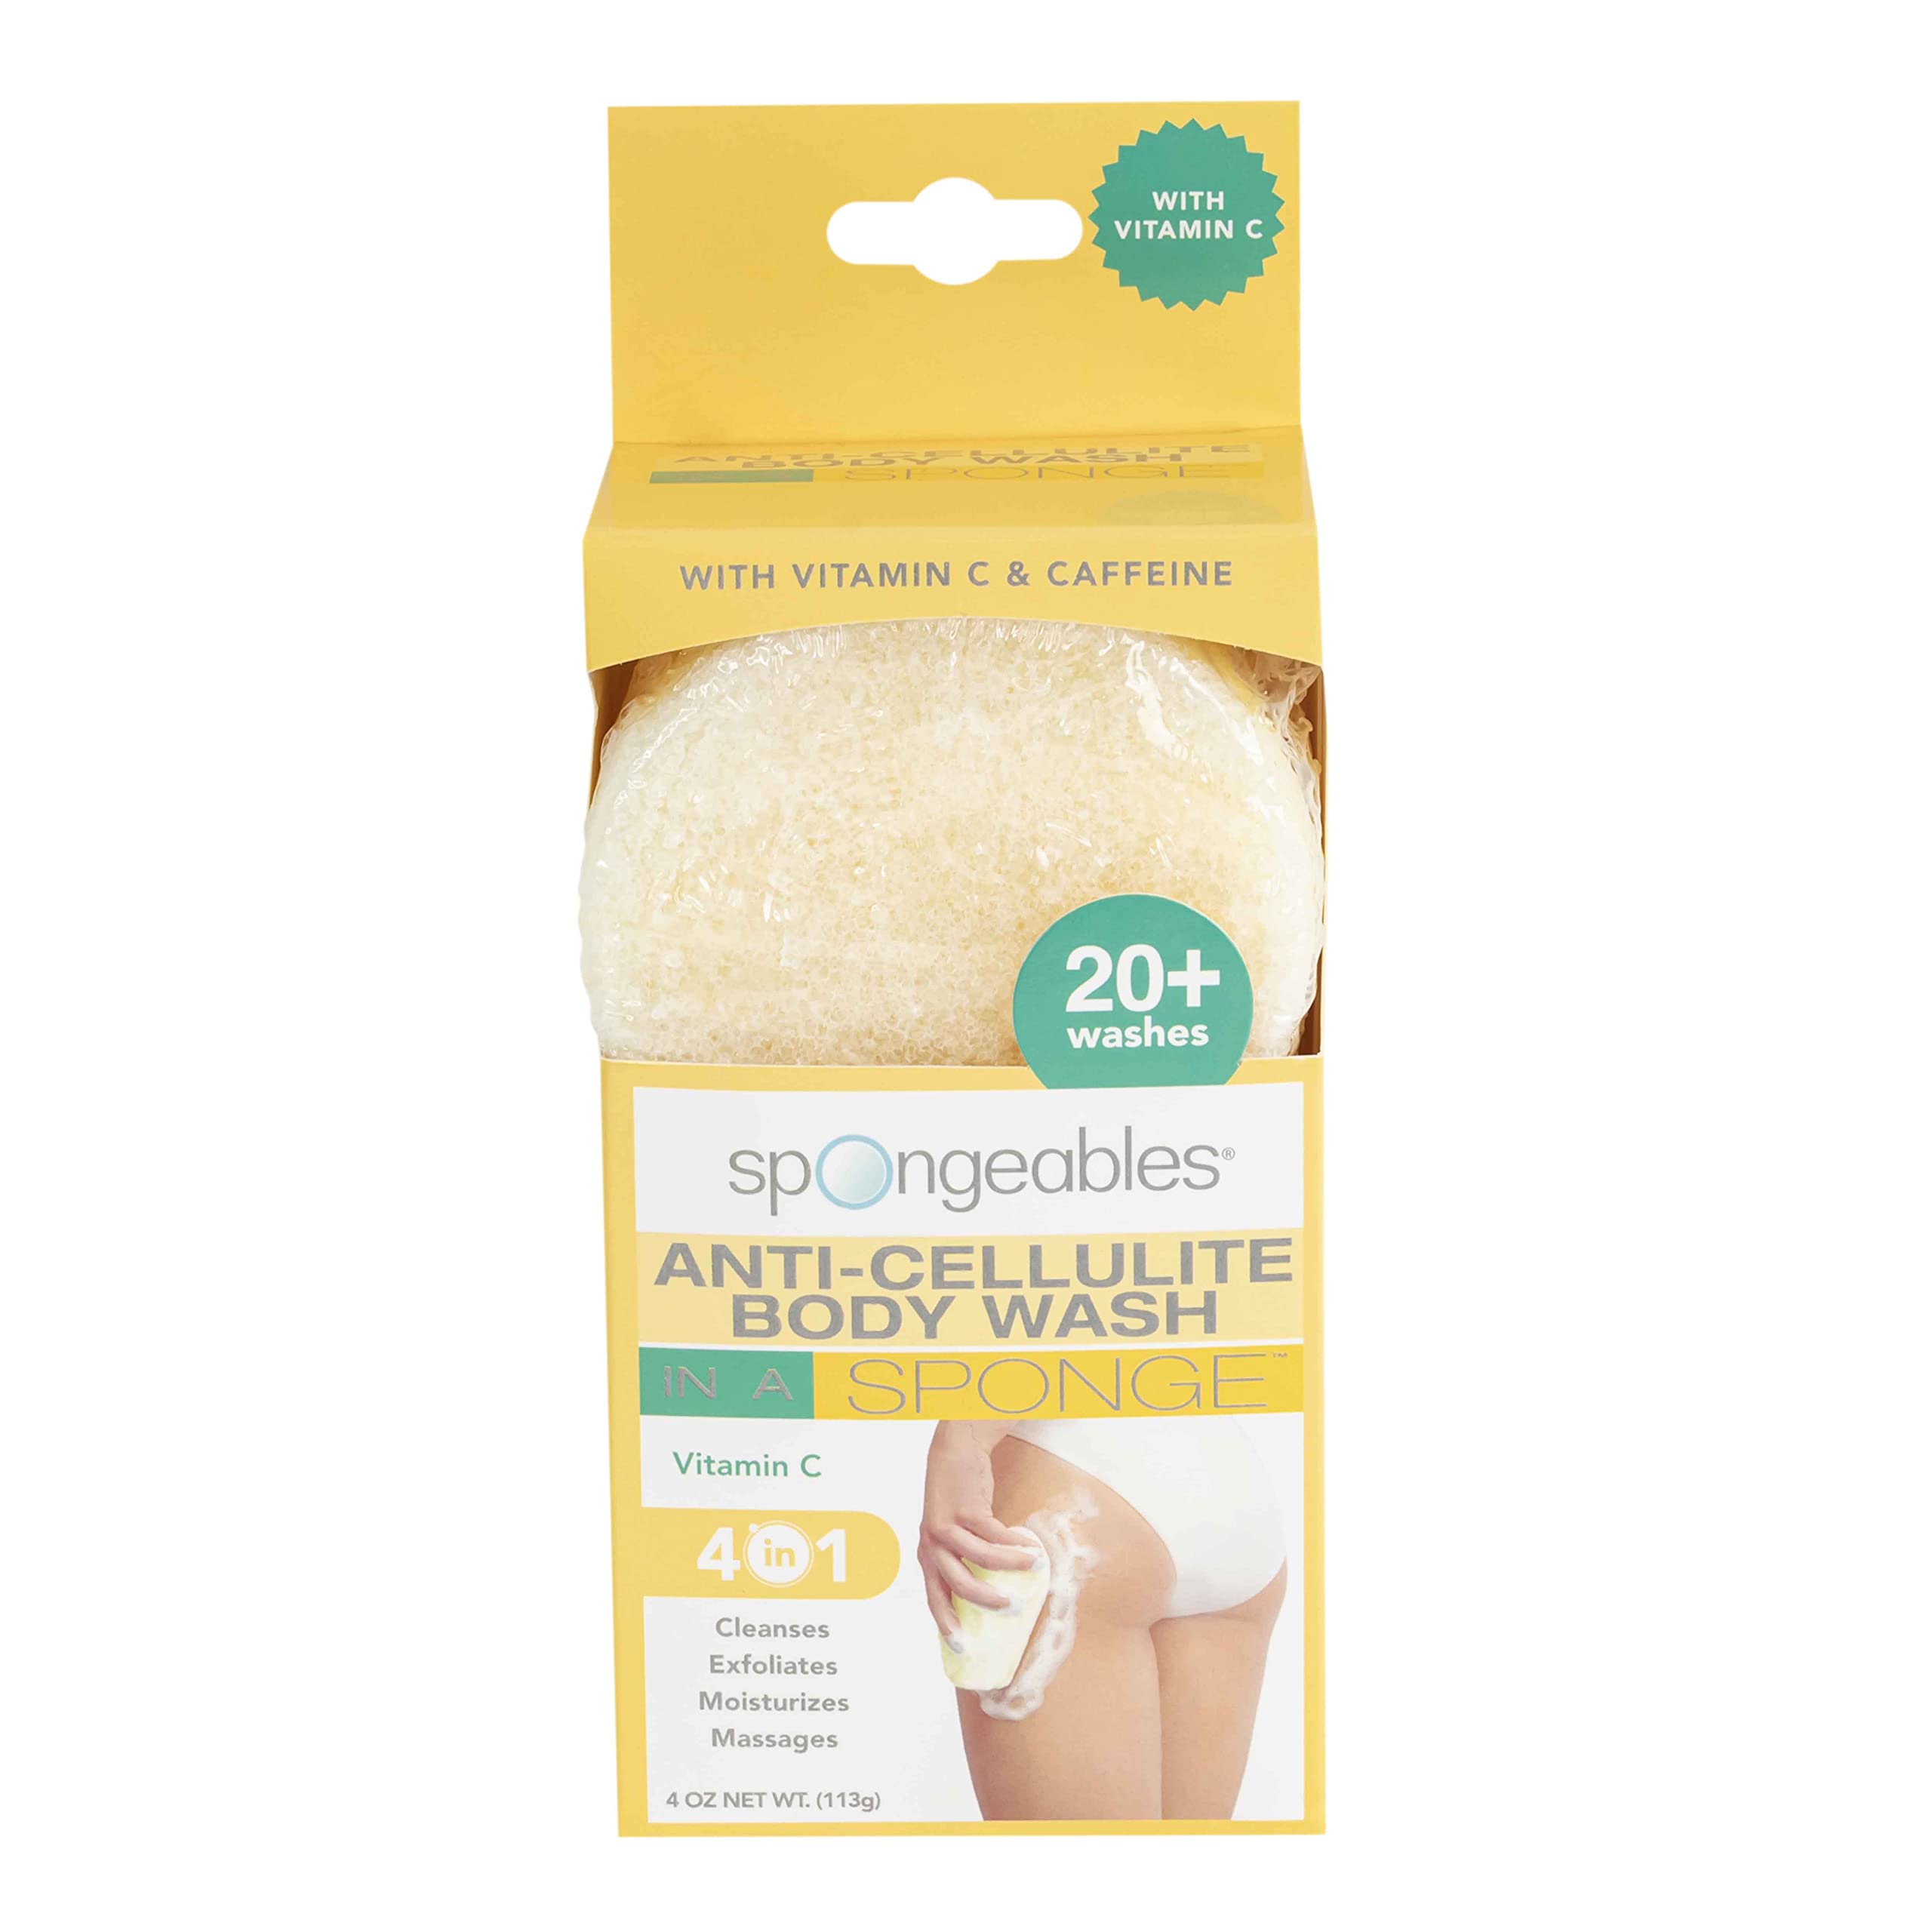 Spongeables AntiCellulite Body Wash in A Sponge with Vitamin C, Reduce The Appearance of Cellulite, Moisturizer and Exfoliator for The Body, 20+ Washes, Citrus, 3 Count